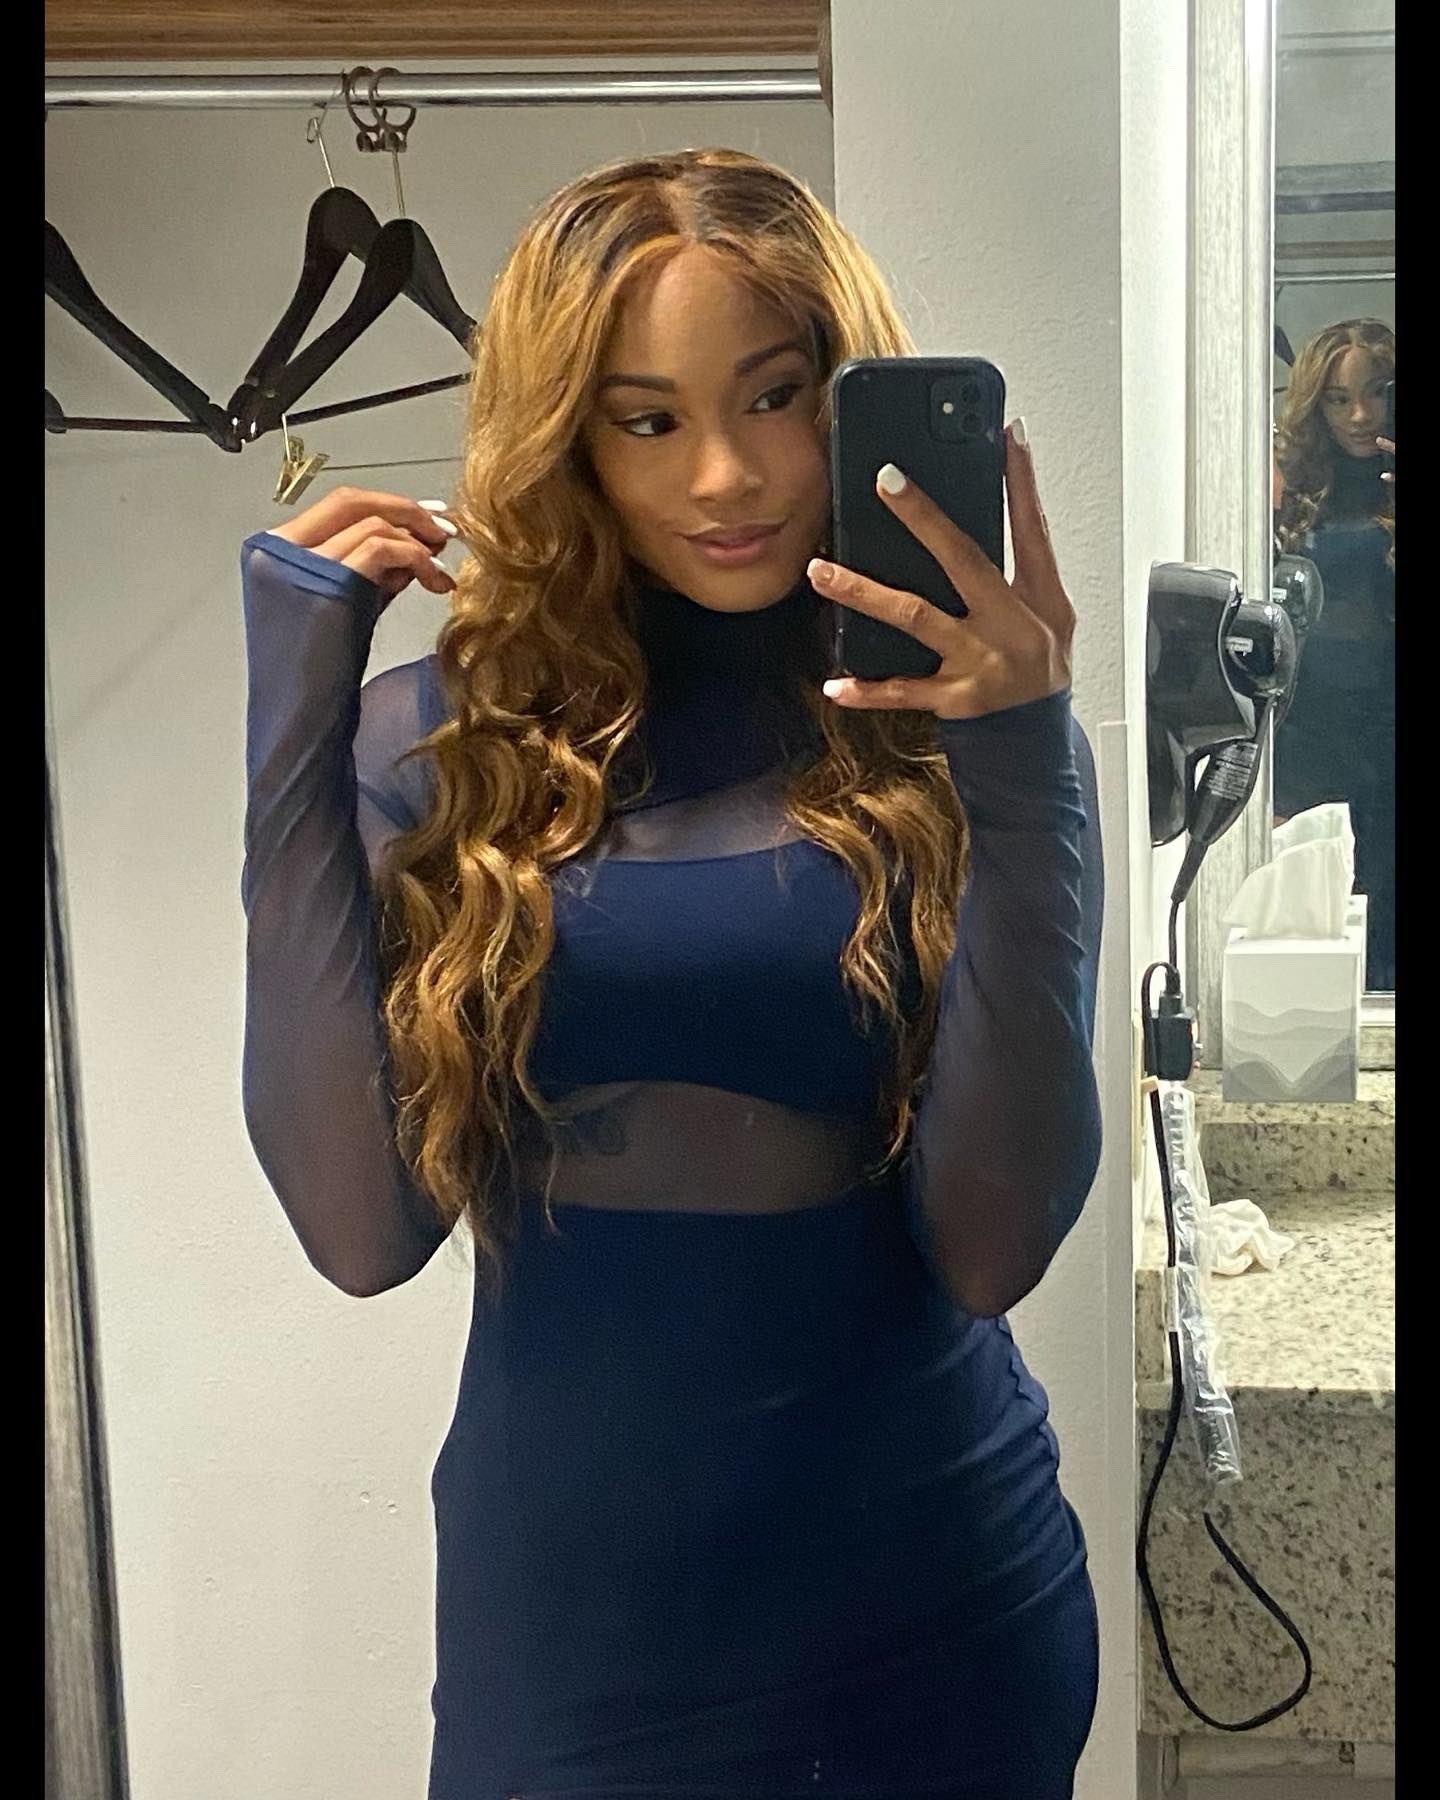 Photo by Ruinedcarpet with the username @Ruinedcarpet,  July 28, 2022 at 9:25 AM. The post is about the topic RC's Mirror Selfies and the text says 'Kaci Lennox.

#KaciLennox #Cute #ProWrestler #Hot #BlackGirl #MirrorSelfie #Sexy #Fit #Slim #Cutie #Hottie #Ebony #Selfie #ChangingRoom #FitGirl #DressingRoom #Blonde #BlackWoman #Cuteness #Beauty #WomensWrestling #ProWrestling'